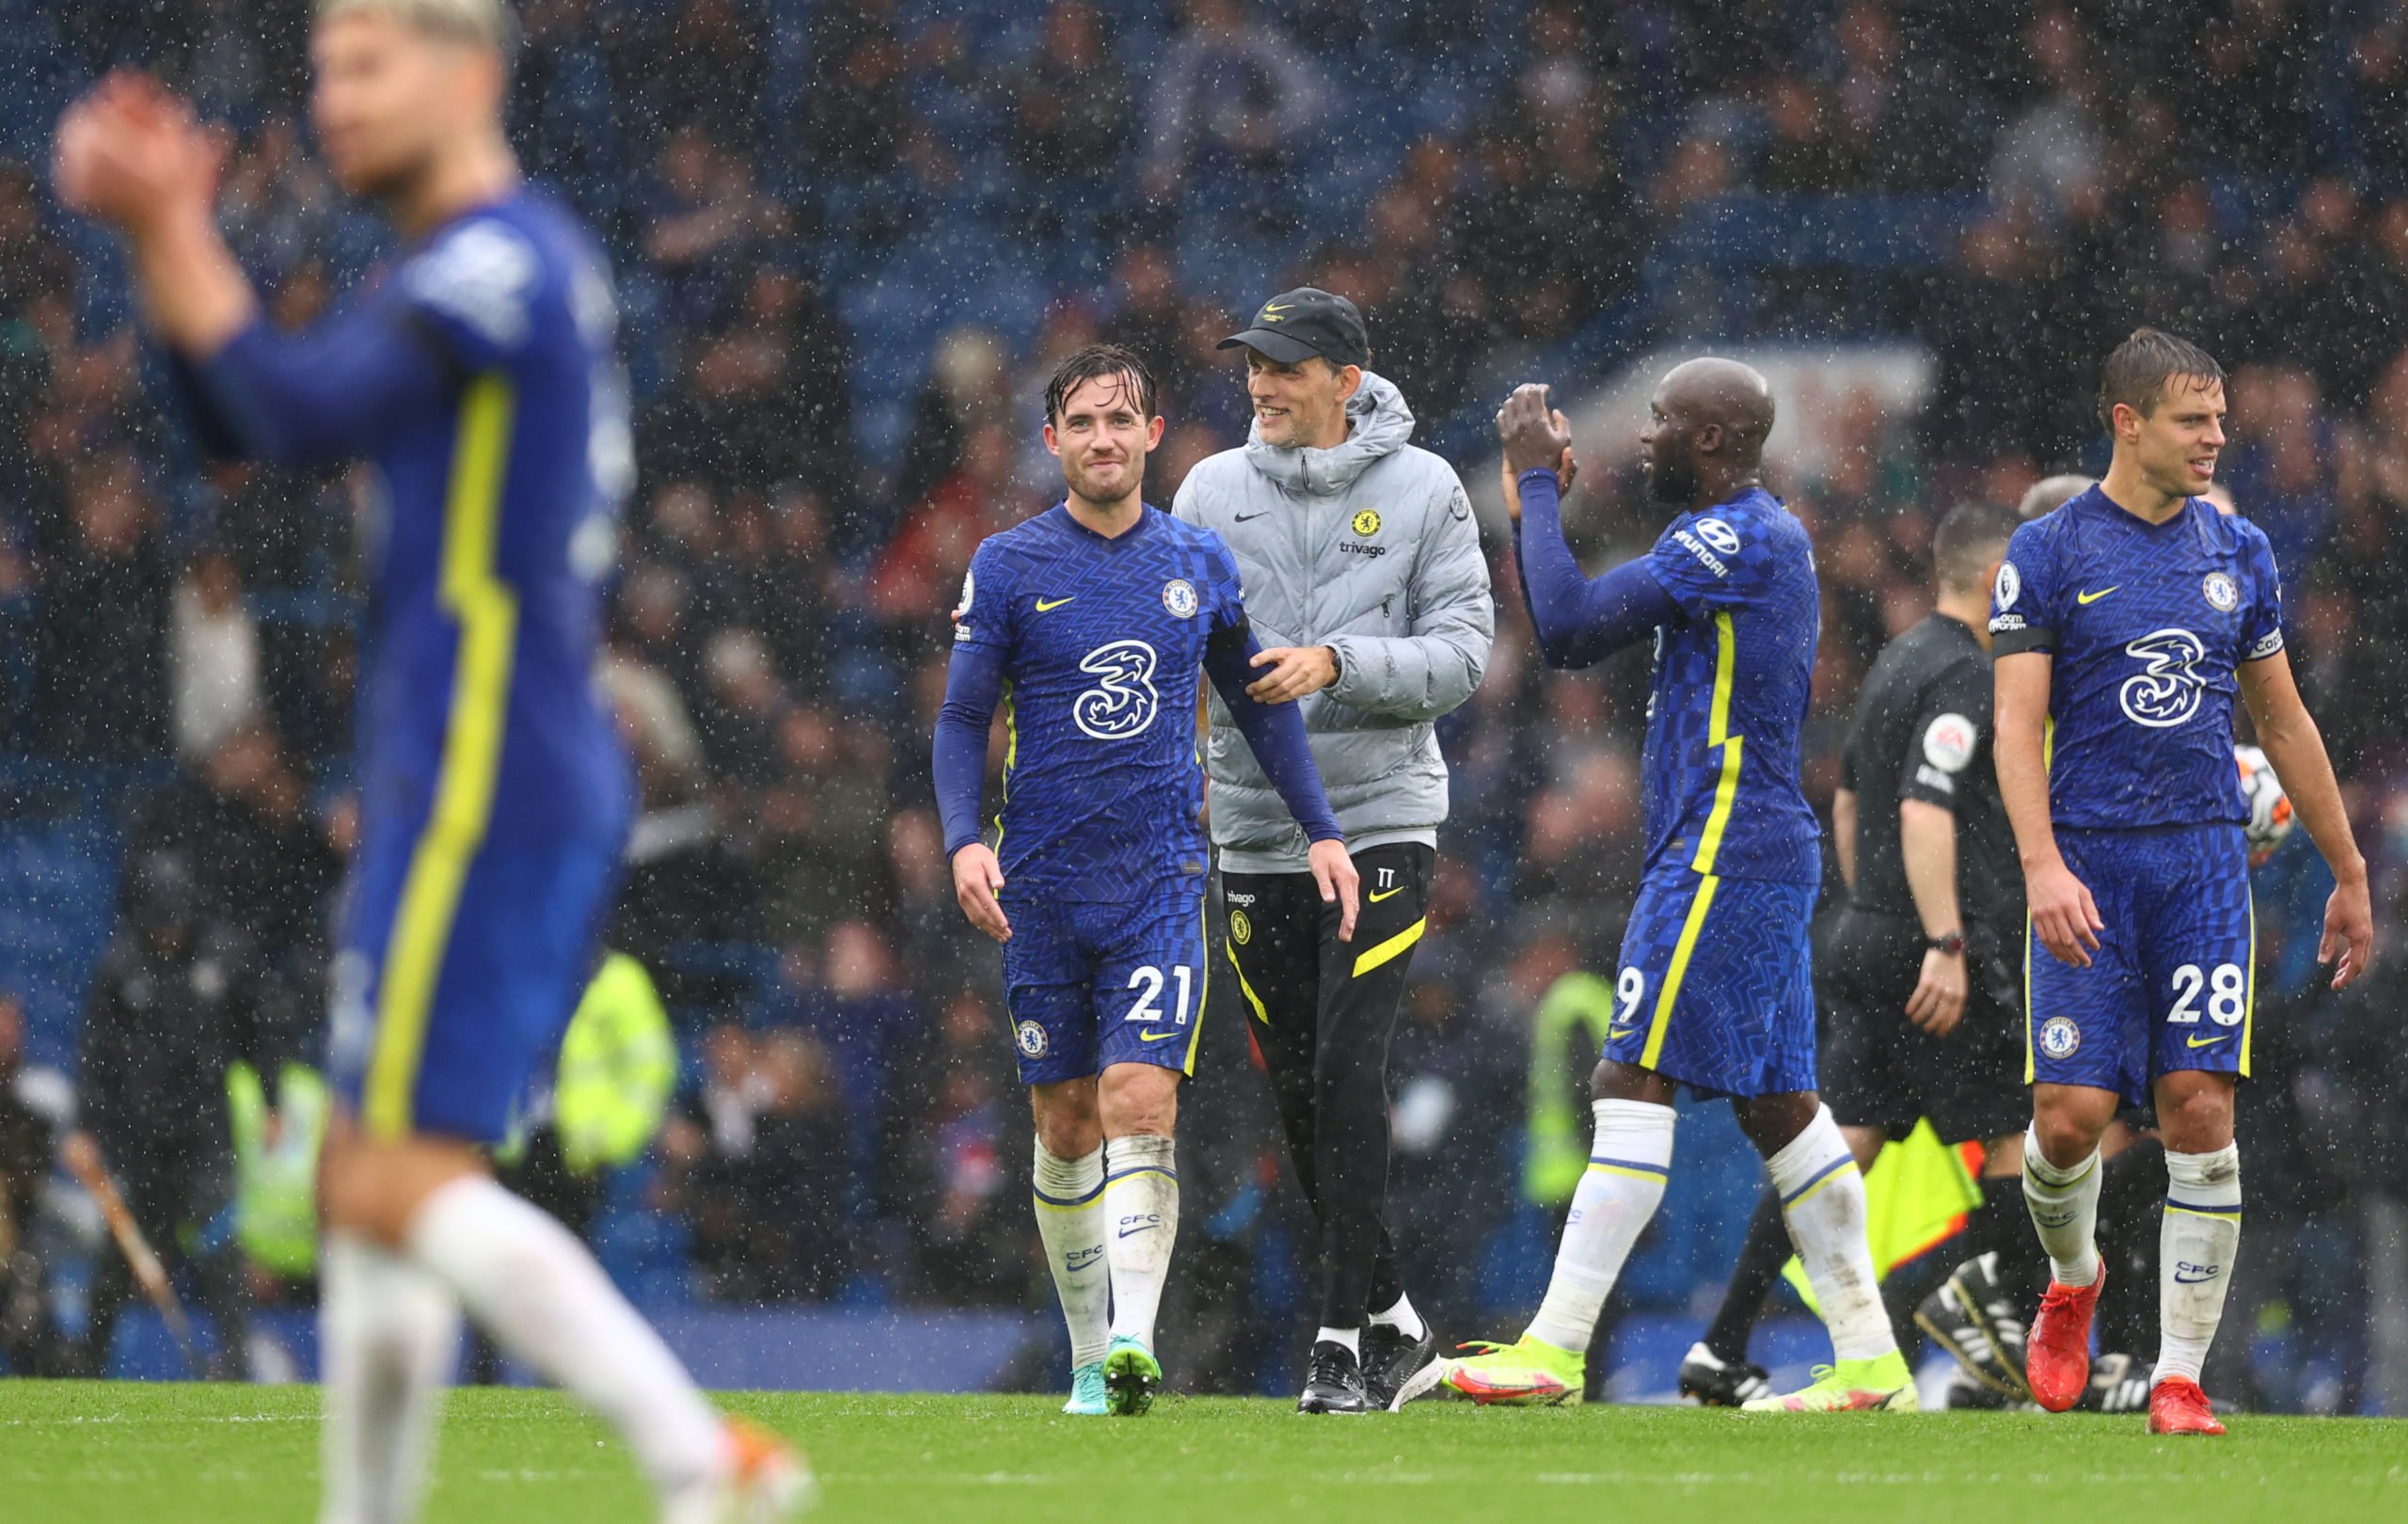 Chelsea Players Rated In Win Vs Southampton (Chelsea players are seen in the picture)